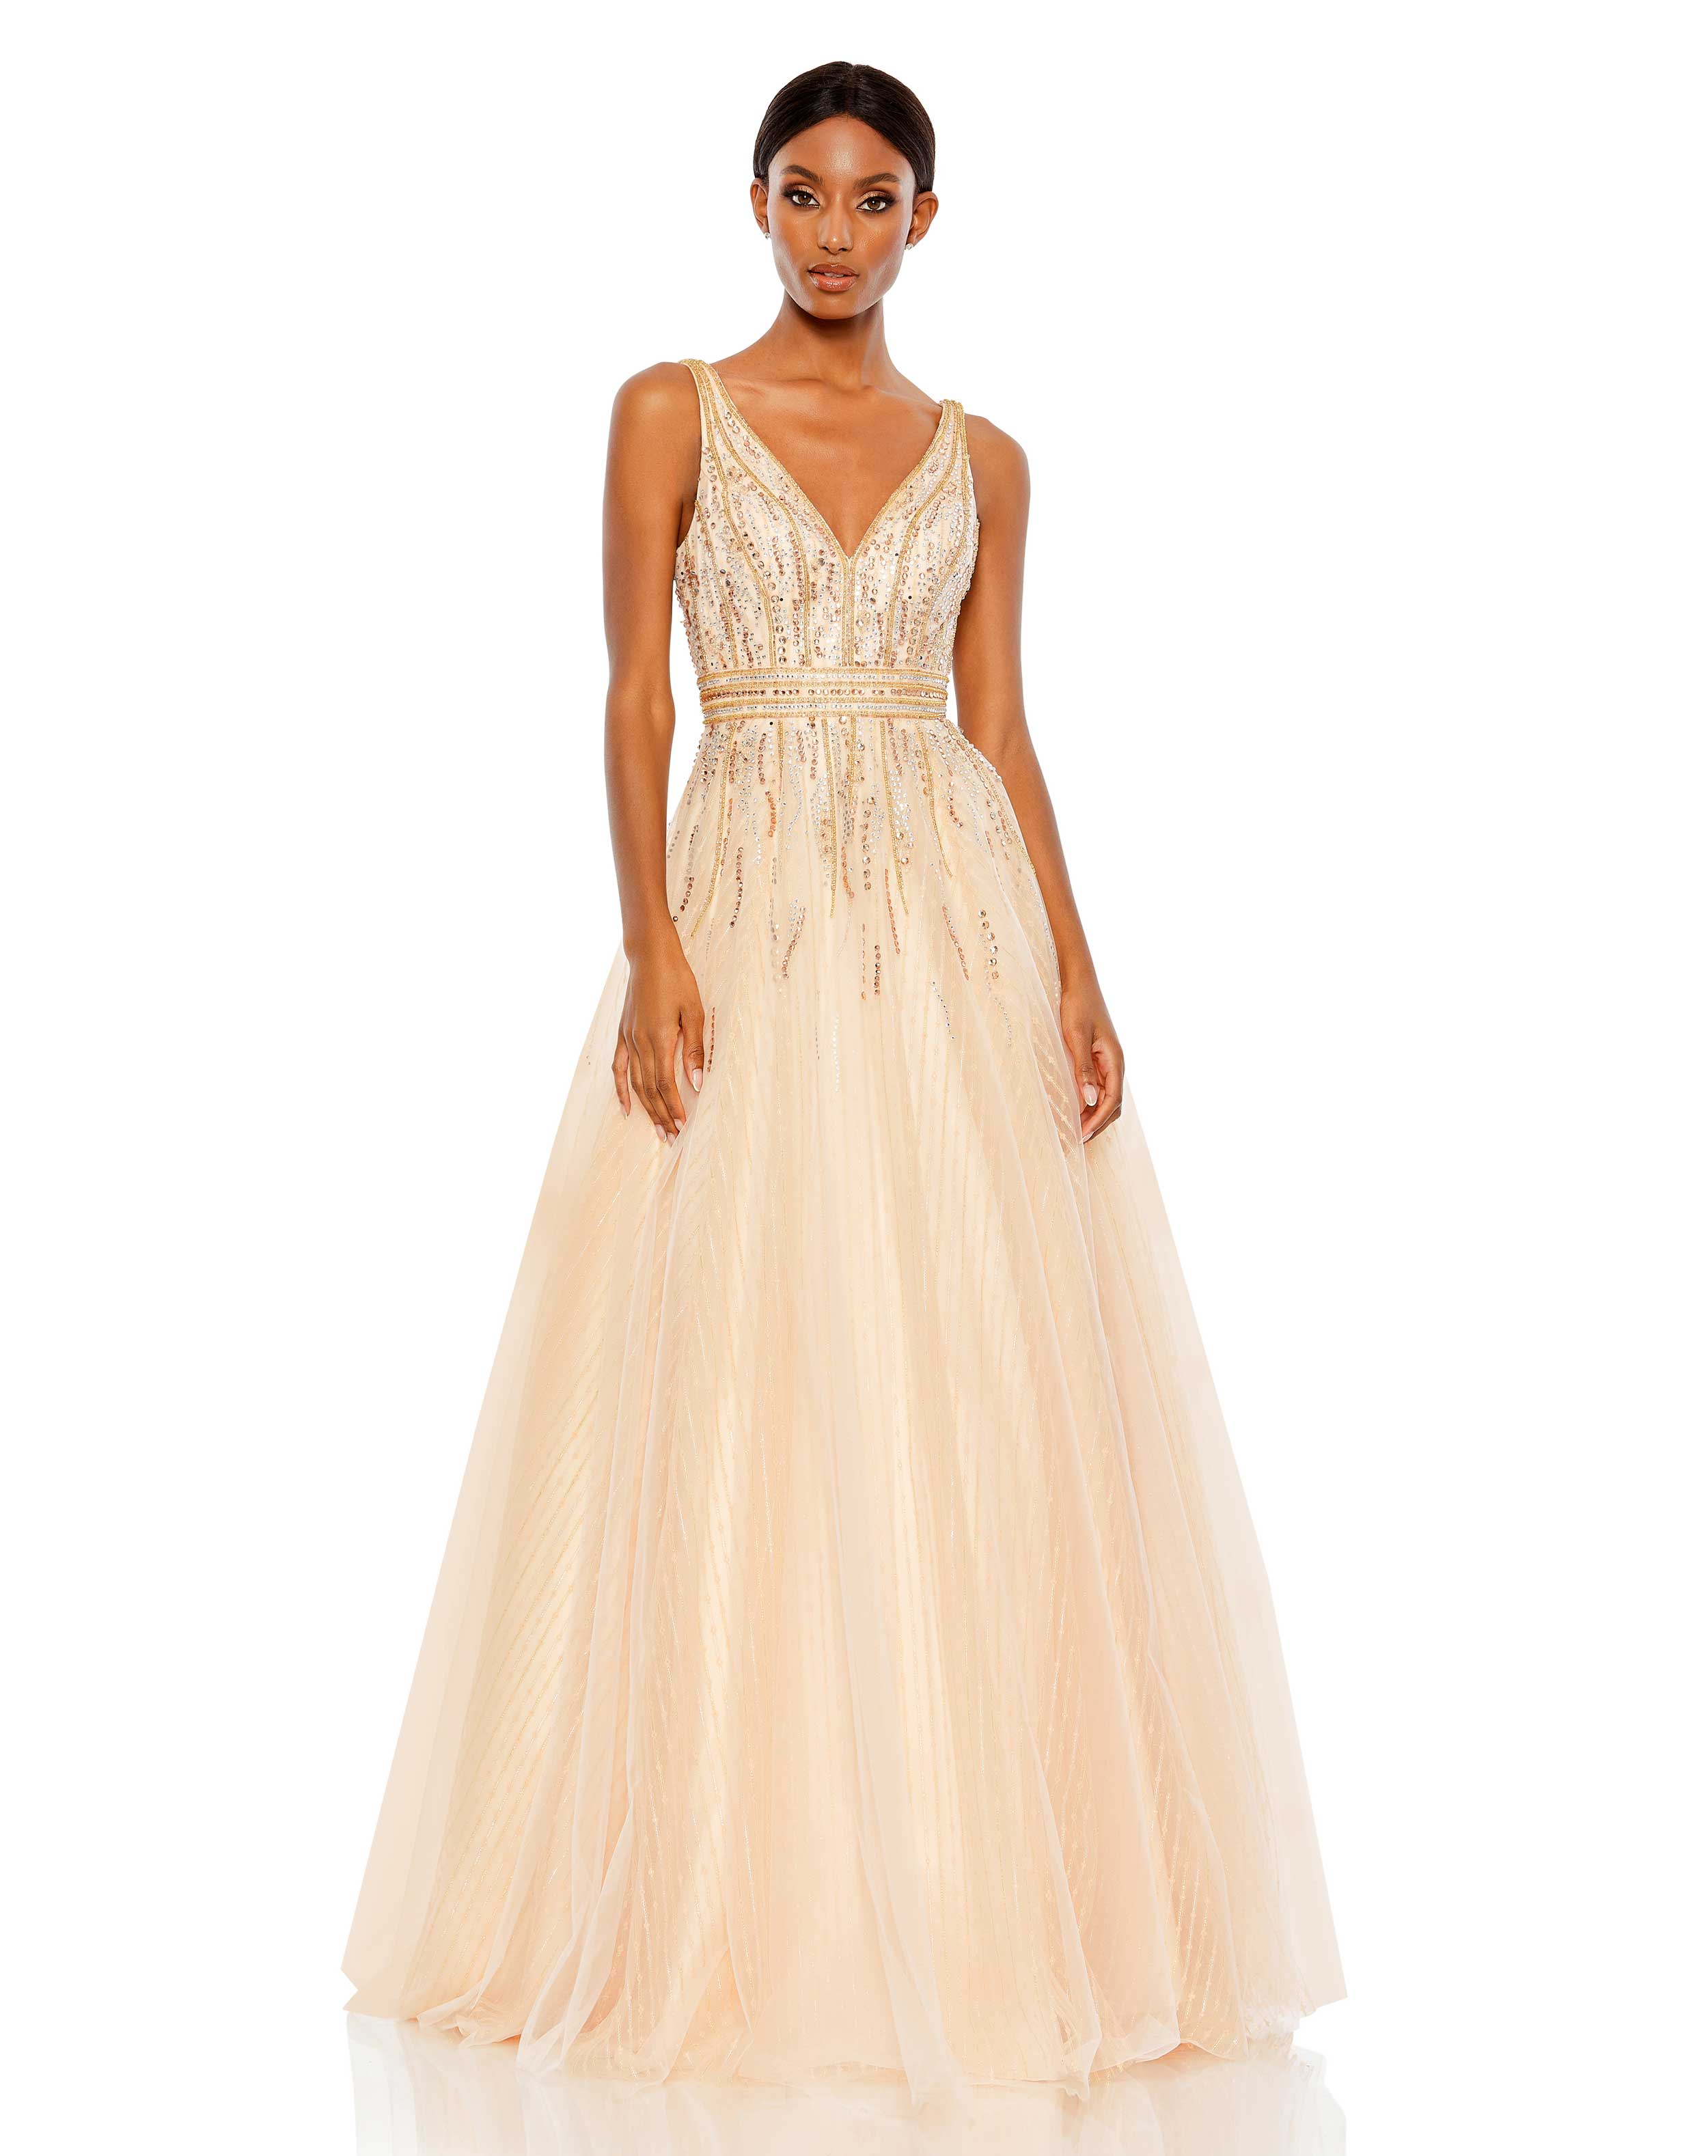 Jewel Encrusted Tulle Ball Gown - FINAL SALE